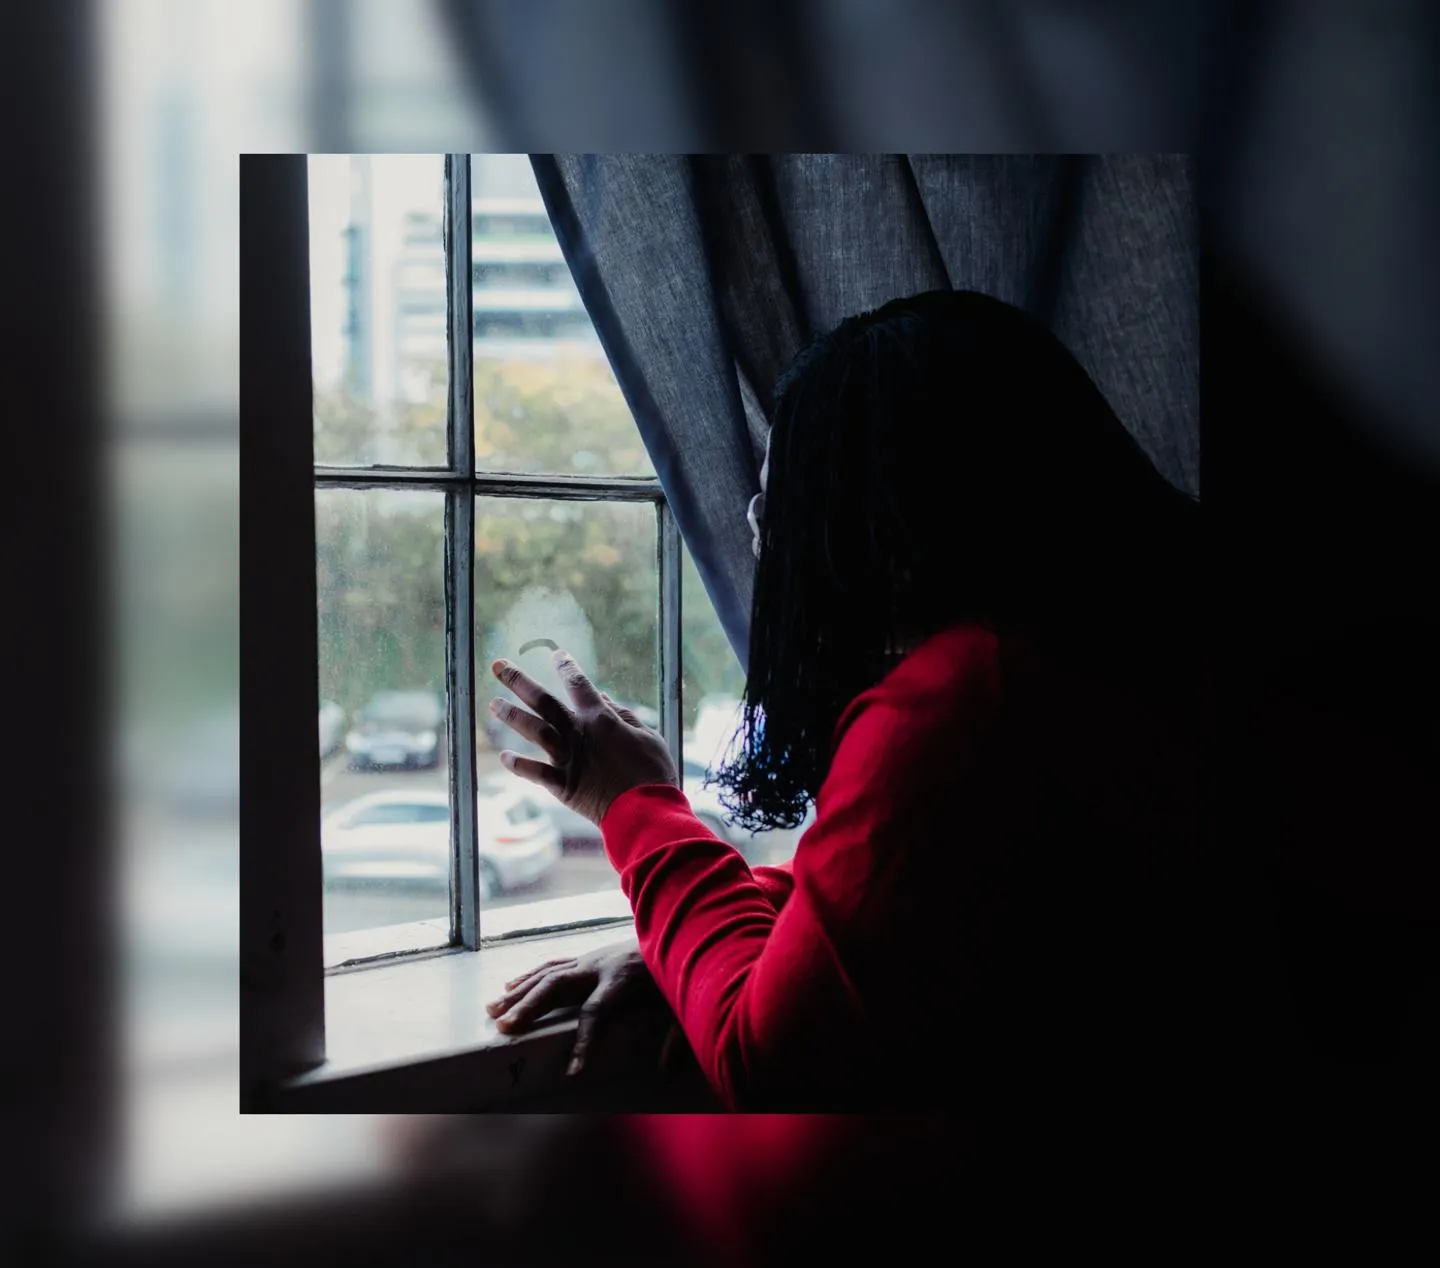 Woman with dark hair and red top staring through a window